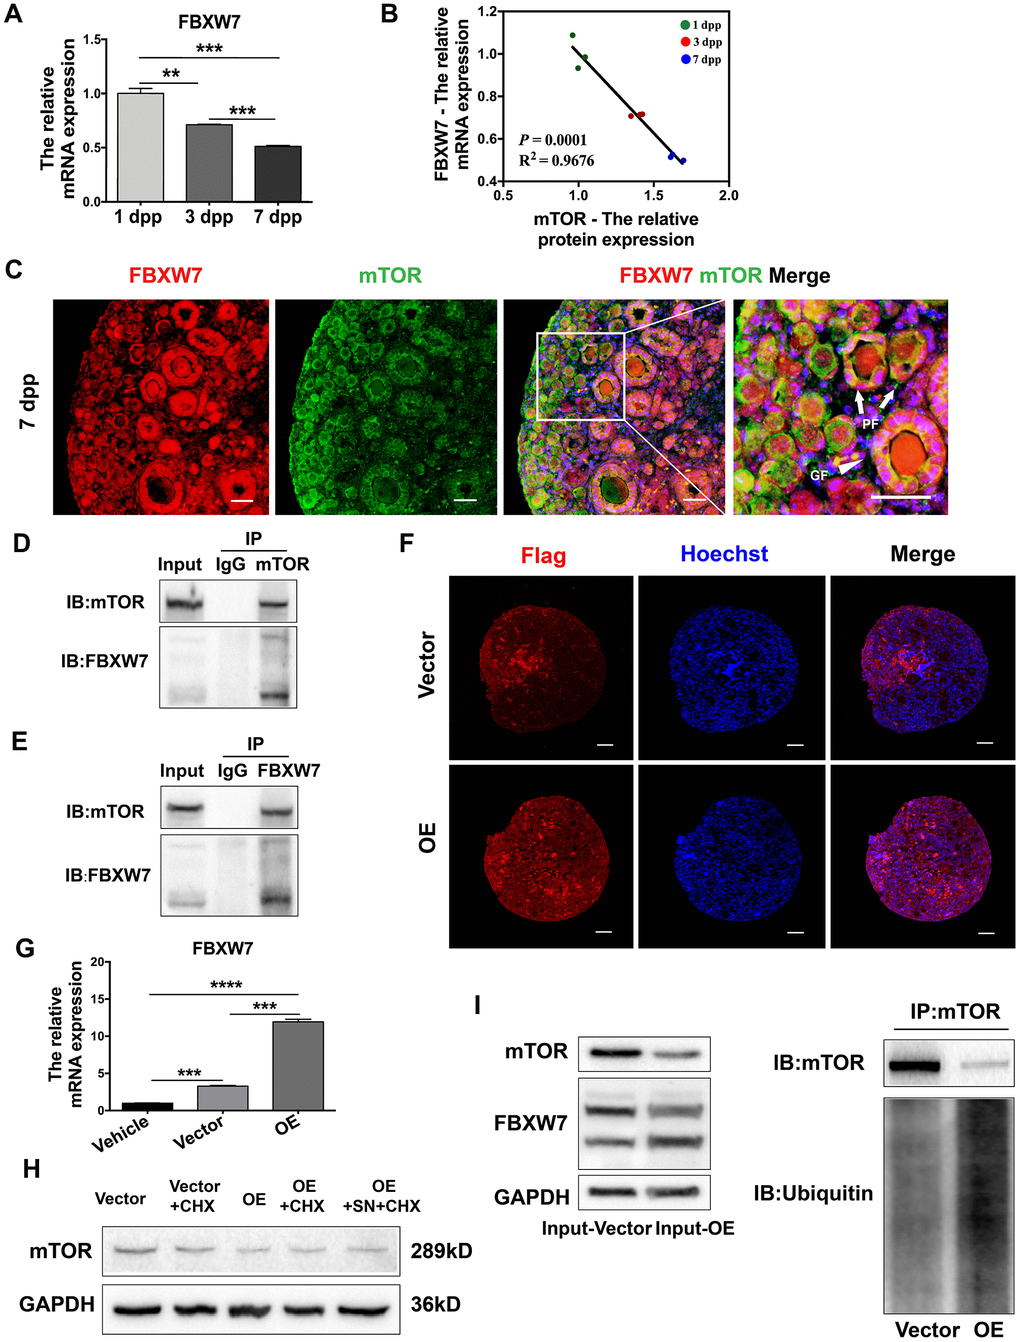 FBXW7 destabilized mTOR protein in a ubiquitin/proteasome-dependent manner. (A) The relative mRNA levels of FBXW7 in ovaries from 1-7 dpp. (B) The correlation between the mRNA levels of FBXW7 and the protein levels of mTOR. (C) Immunofluorescence analysis displaying the colocalization of mTOR and FBXW7 in neonatal ovaries. Arrows indicate PFs and triangles indicate GFs. Scale bar, 40 μm. (D) Immunoblotting analysis of Co-IP against mTOR. (E) Immunoblotting analysis of Co-IP against FBXW7. (F) Six days after transfection, immunofluorescence staining for Flag was performed in the empty vector- and FBXW7 overexpression (OE) vector-treated ovaries. Scale bar, 40 μm. (G) Three days after transfection, the relative mRNA levels of FBXW7 were detected in the empty vector and OE vector groups. (H) Western blotting analysis of mTOR protein levels in ovaries treated for 4 h with CHX or SN + CHX three days after transfection. (I) Immunoblotting analysis of Co-IP against mTOR in ovaries three days after transfection. ** and *** denote statistical significance at p p 